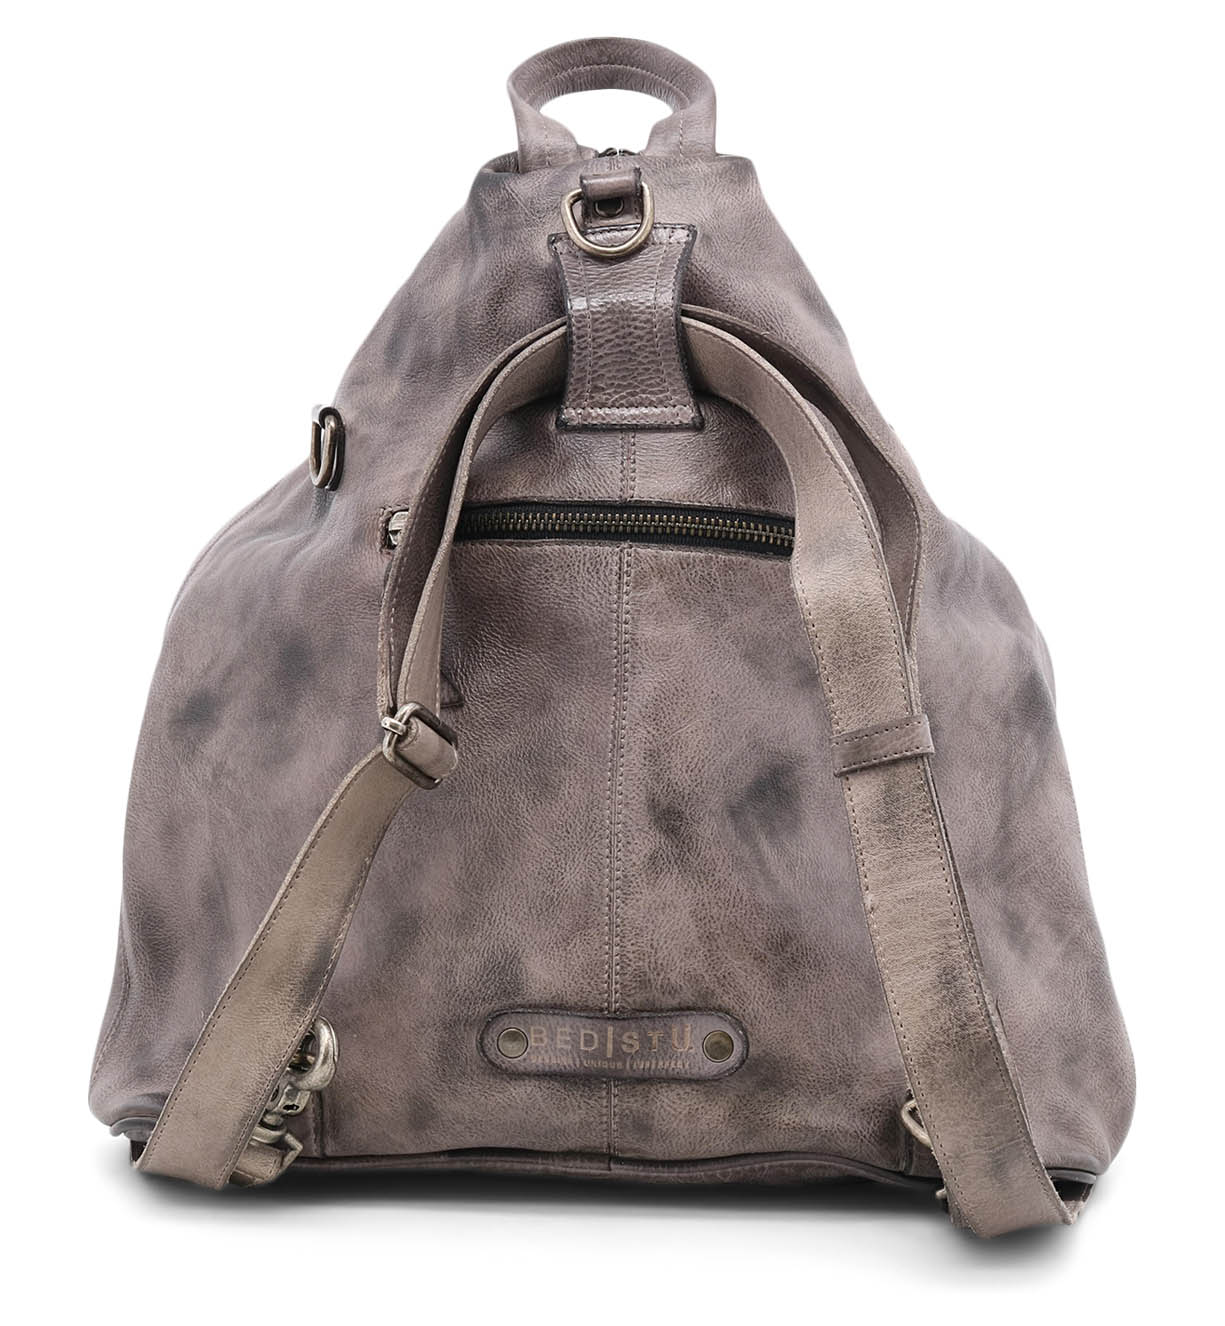 A grey leather Bed Stu backpack with straps and buckles.